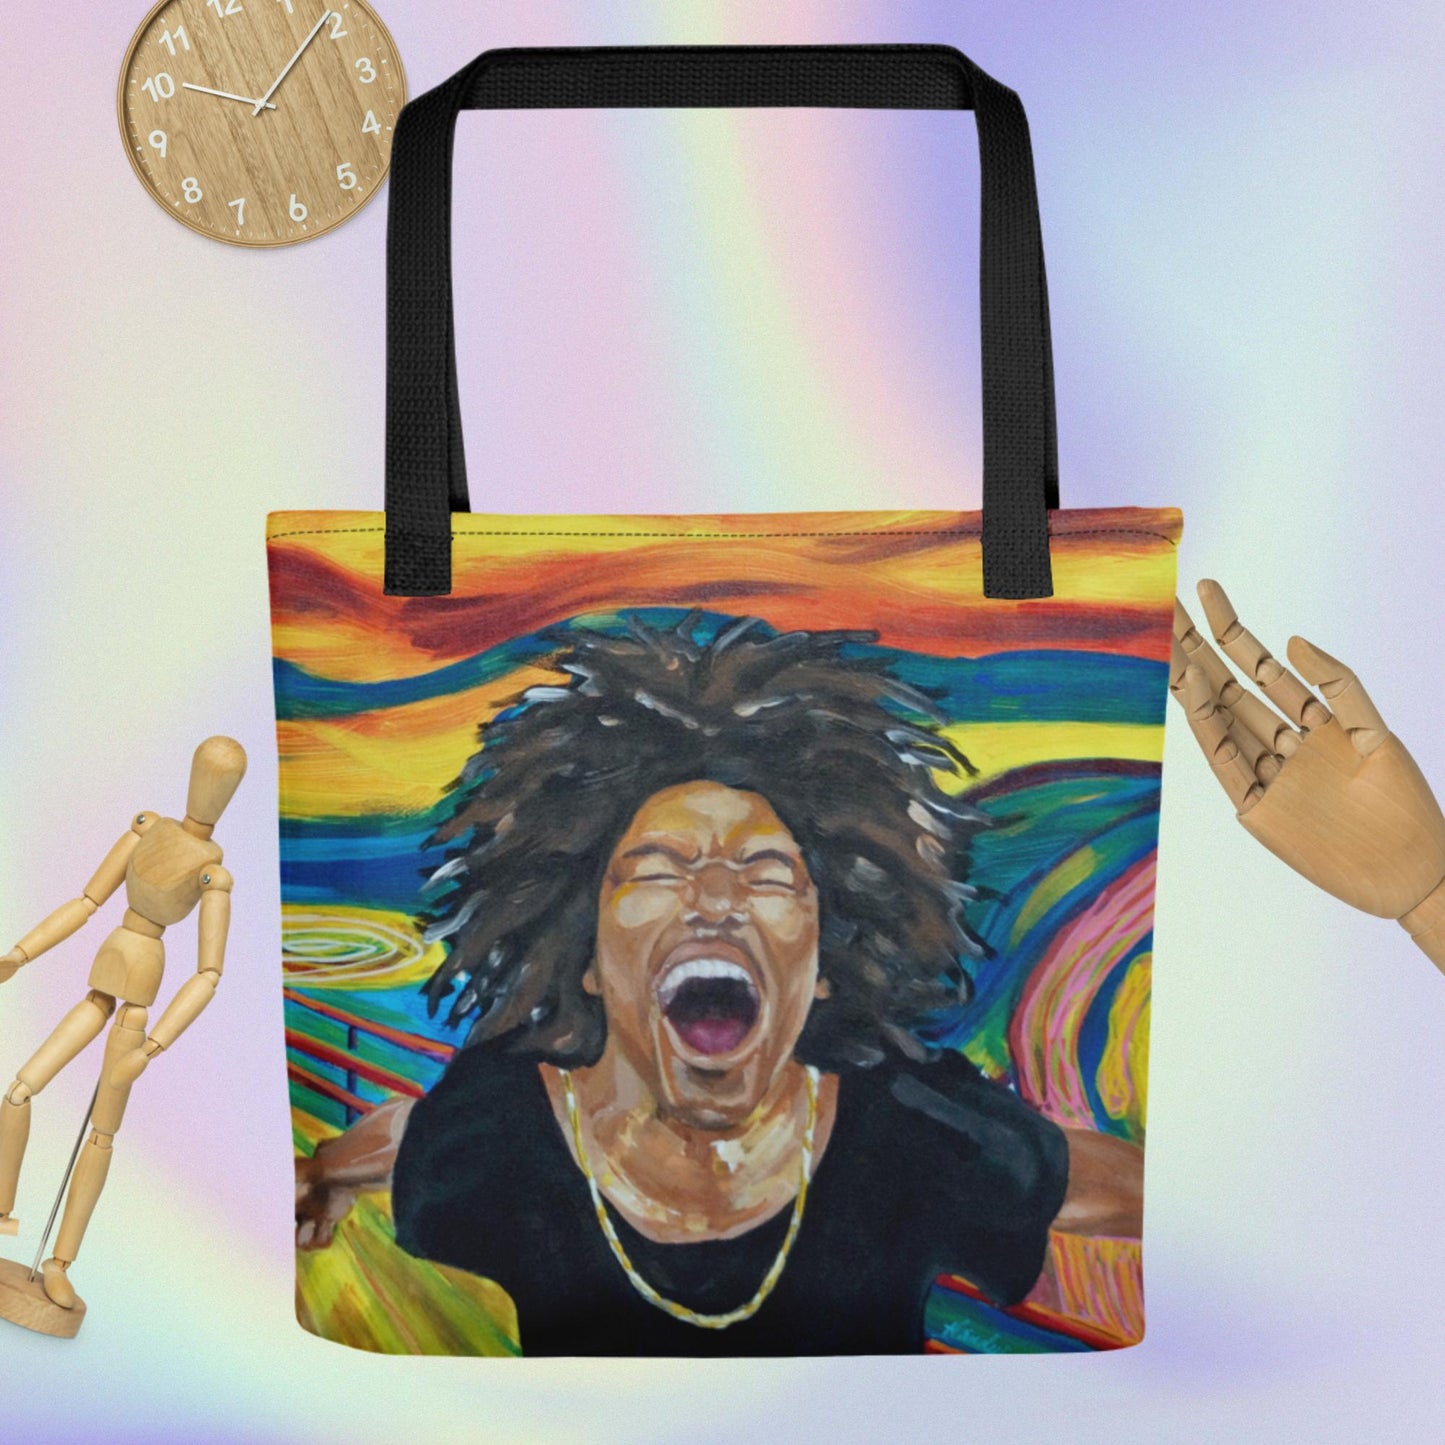 tote bag with artwork from original painting by Cheryl Handy. "Holla!" w/ Black handle.